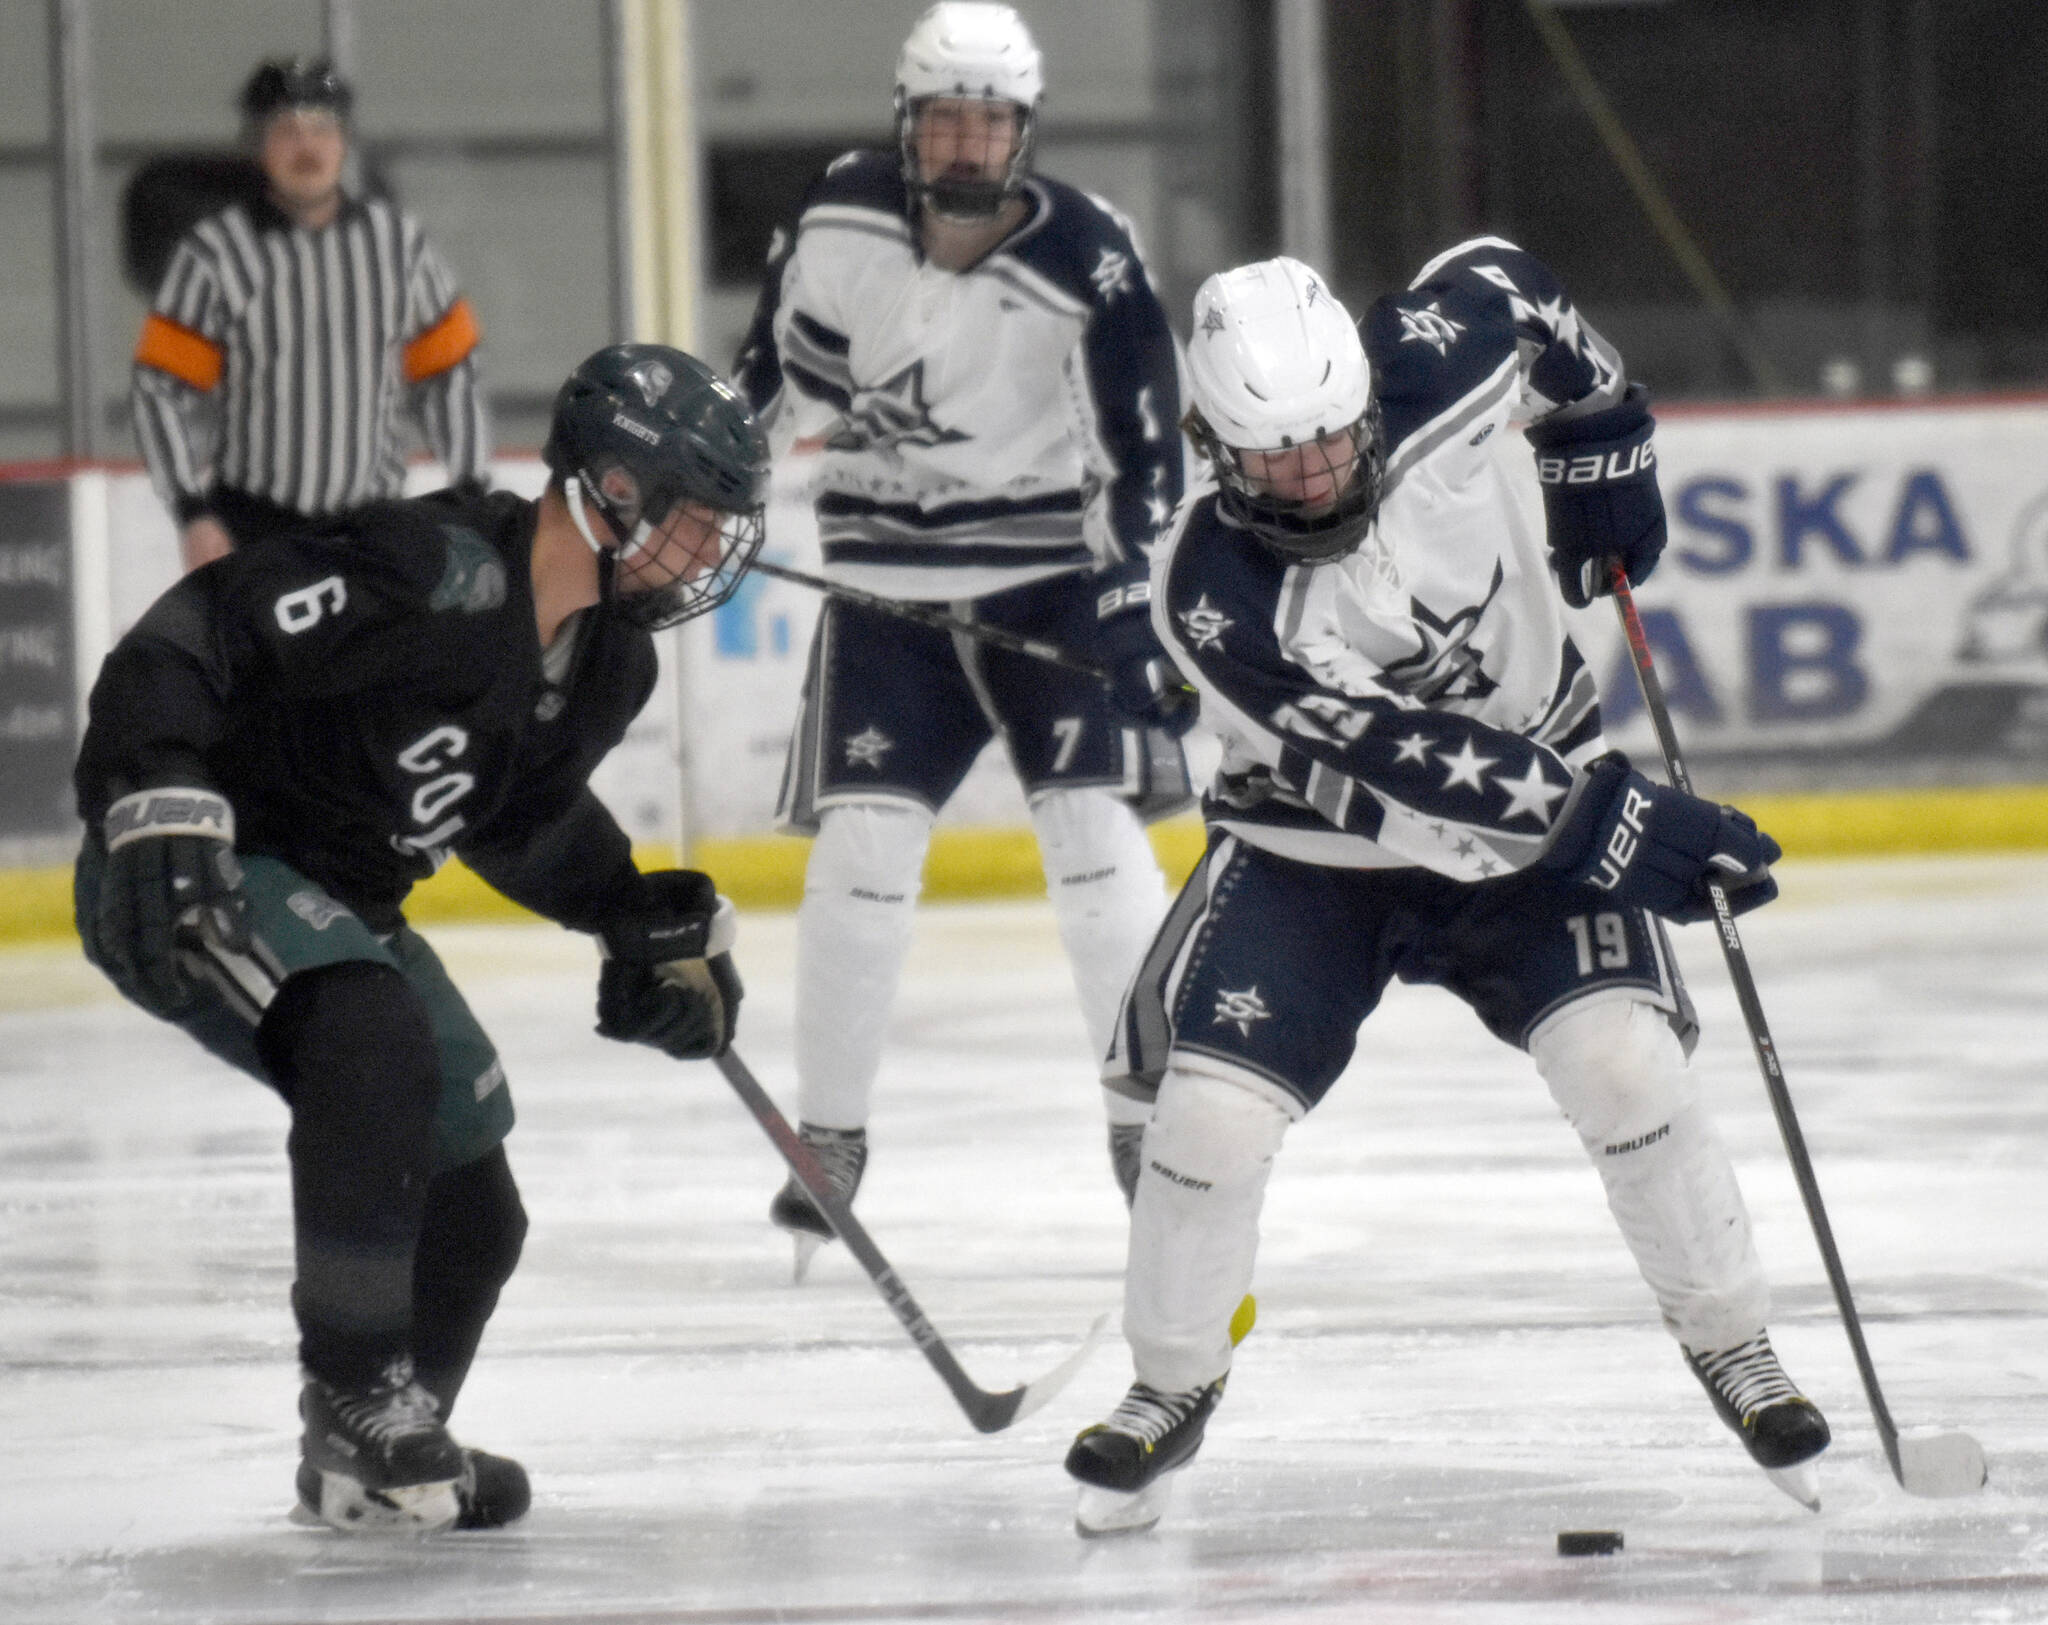 Colony’s Robbie Yundt and Soldotna’s Marshall DeRaeve battle for the puck Saturday, Jan. 7, 2023, at the Soldotna Regional Sports Complex in Soldotna, Alaska. (Photo by Jeff Helminiak/Peninsula Clarion)